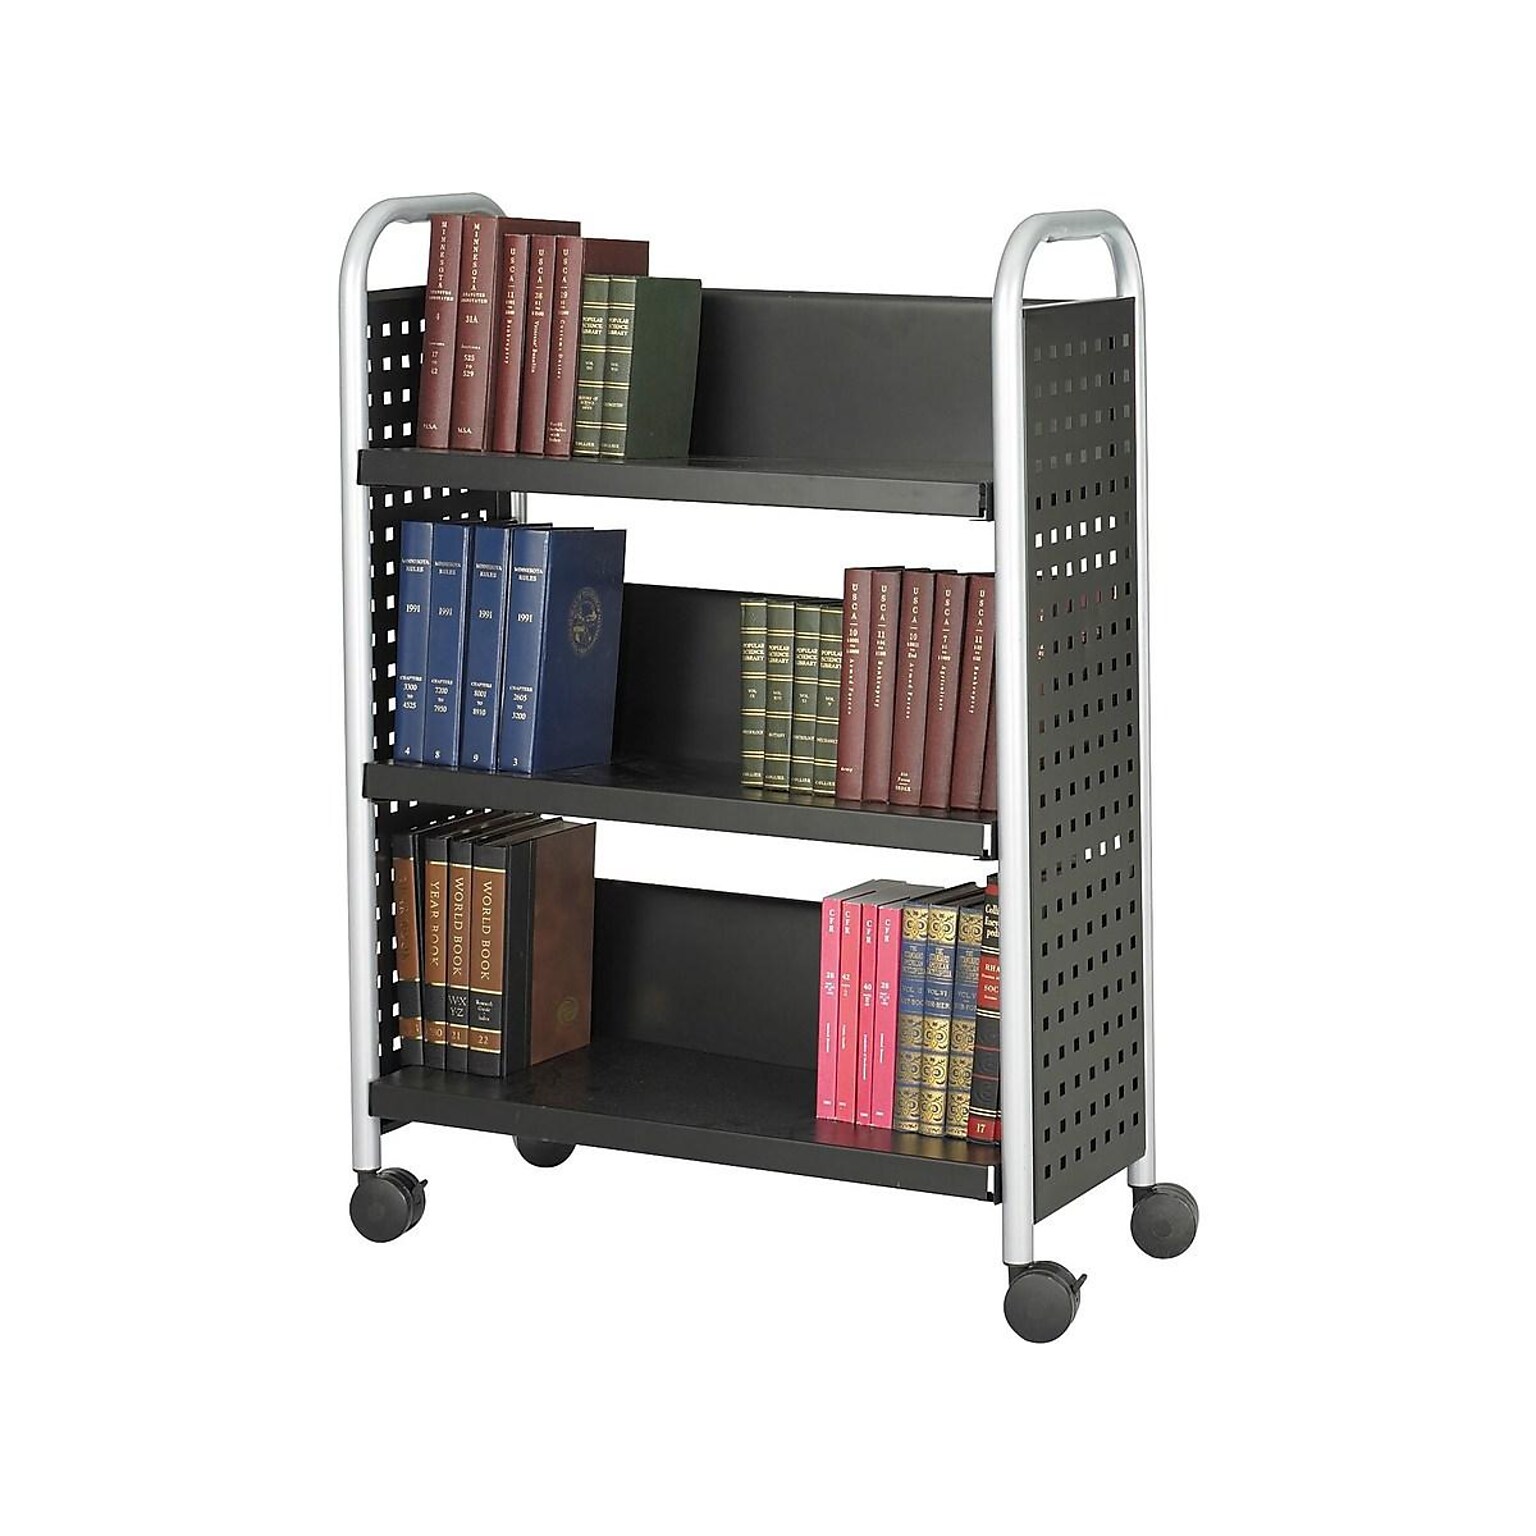 Safco Scoot 3-Shelf Metal Mobile Book Cart with Lockable Wheels, Black (5336BL)